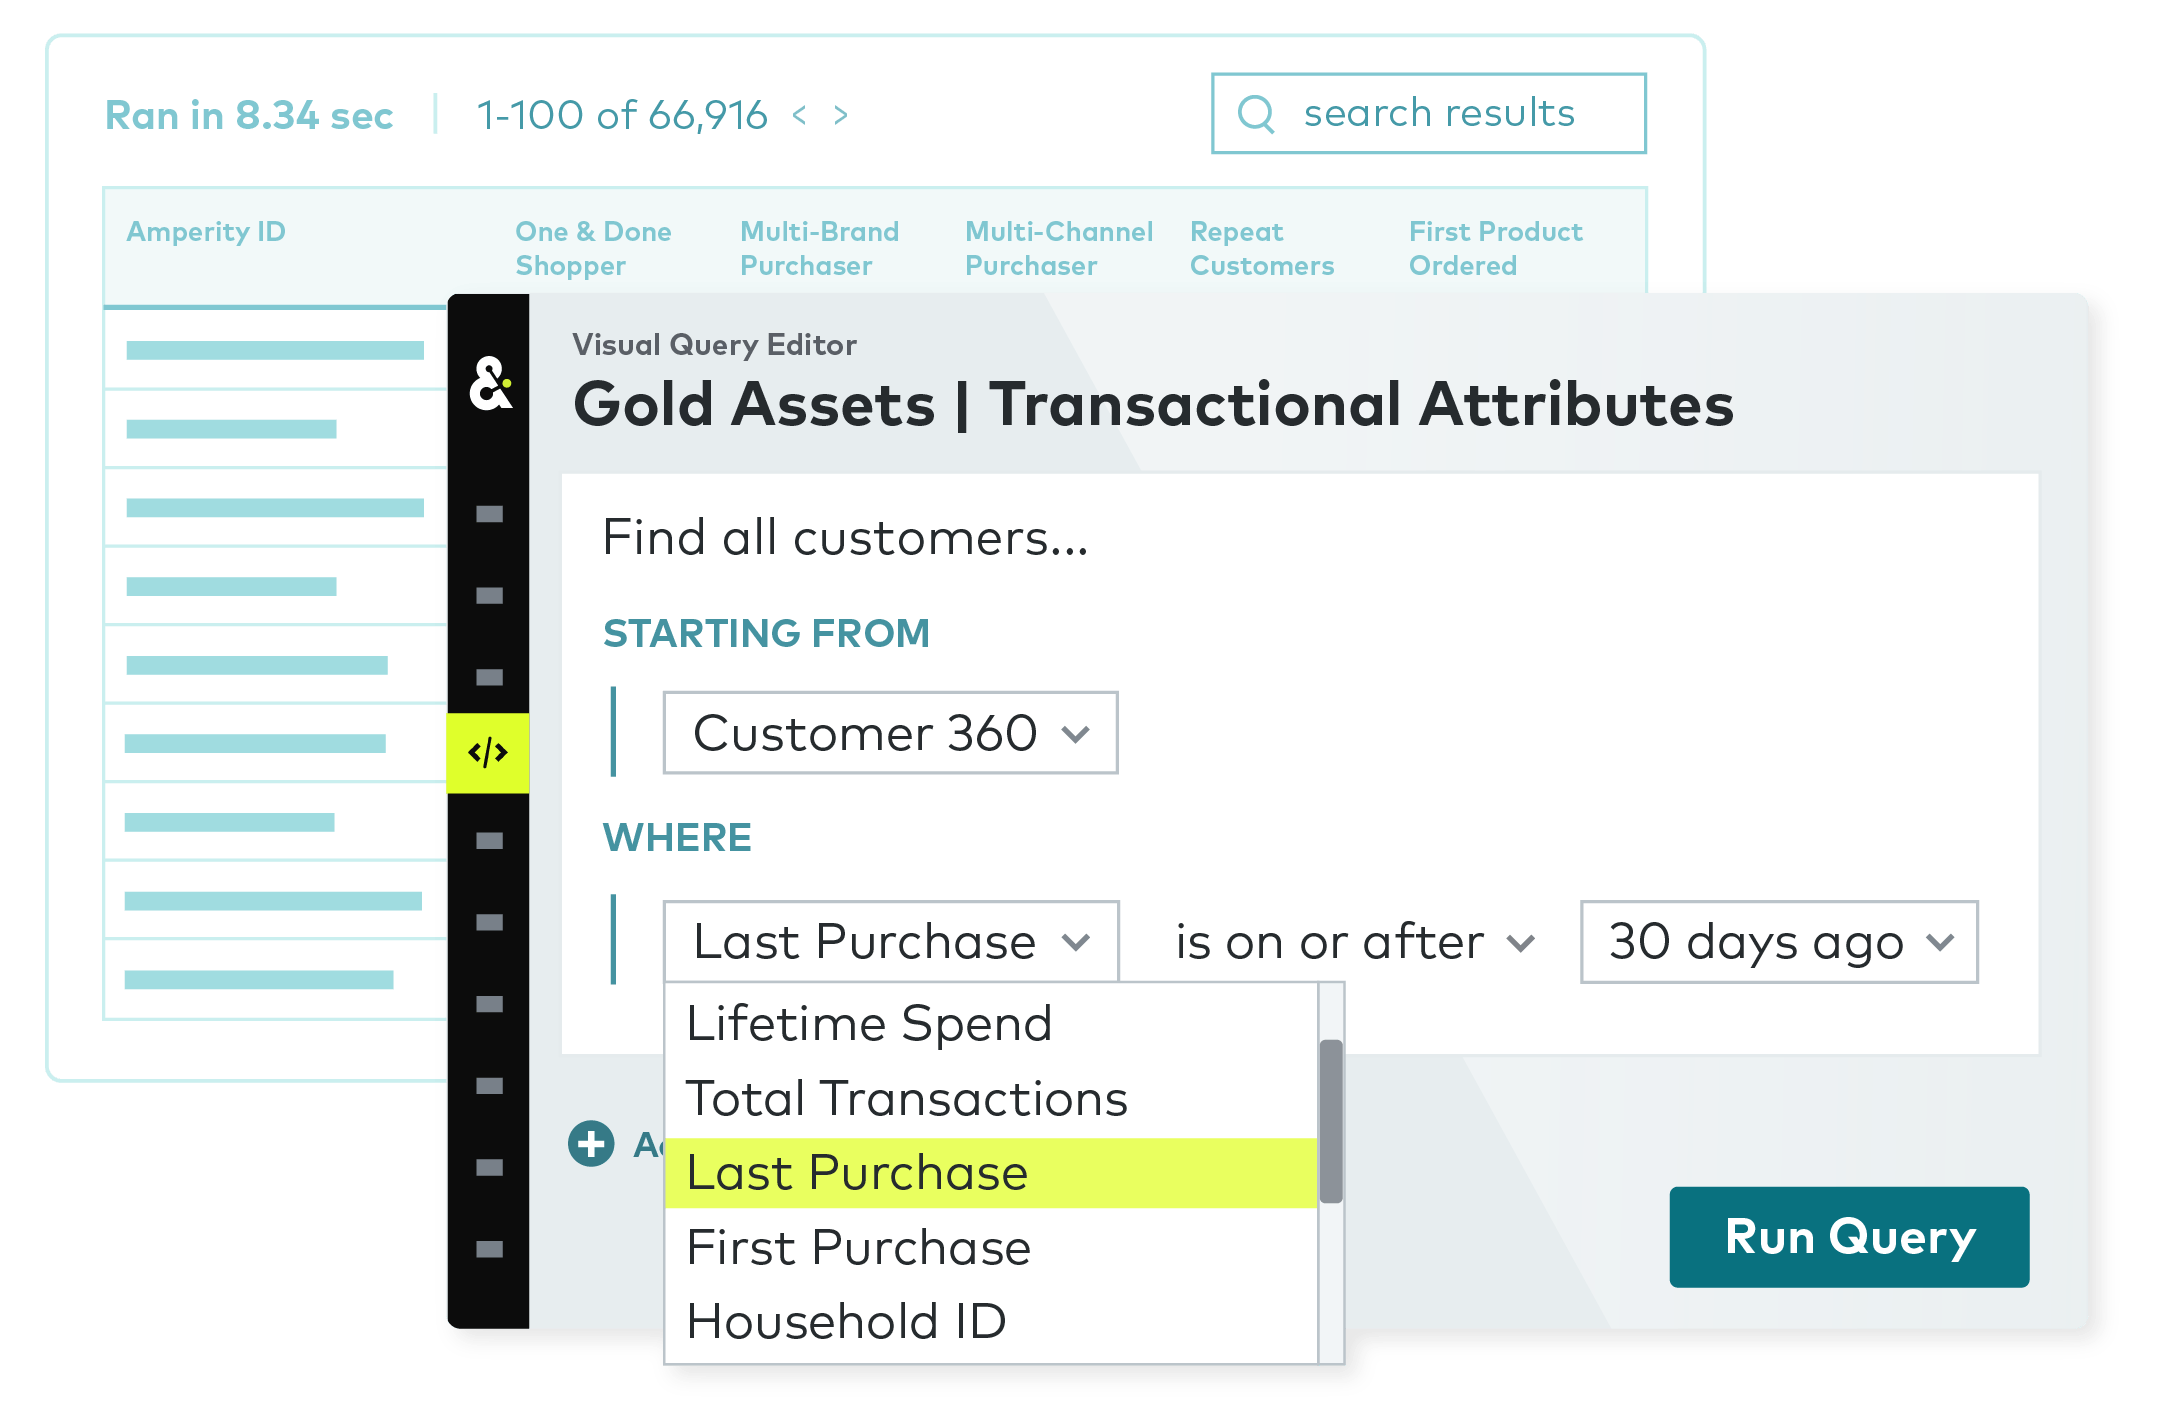 Visual segment editor in the Amperity platform displaying a query from the "Customer 360" with "Last purchase" is "on or after" "30 days ago".